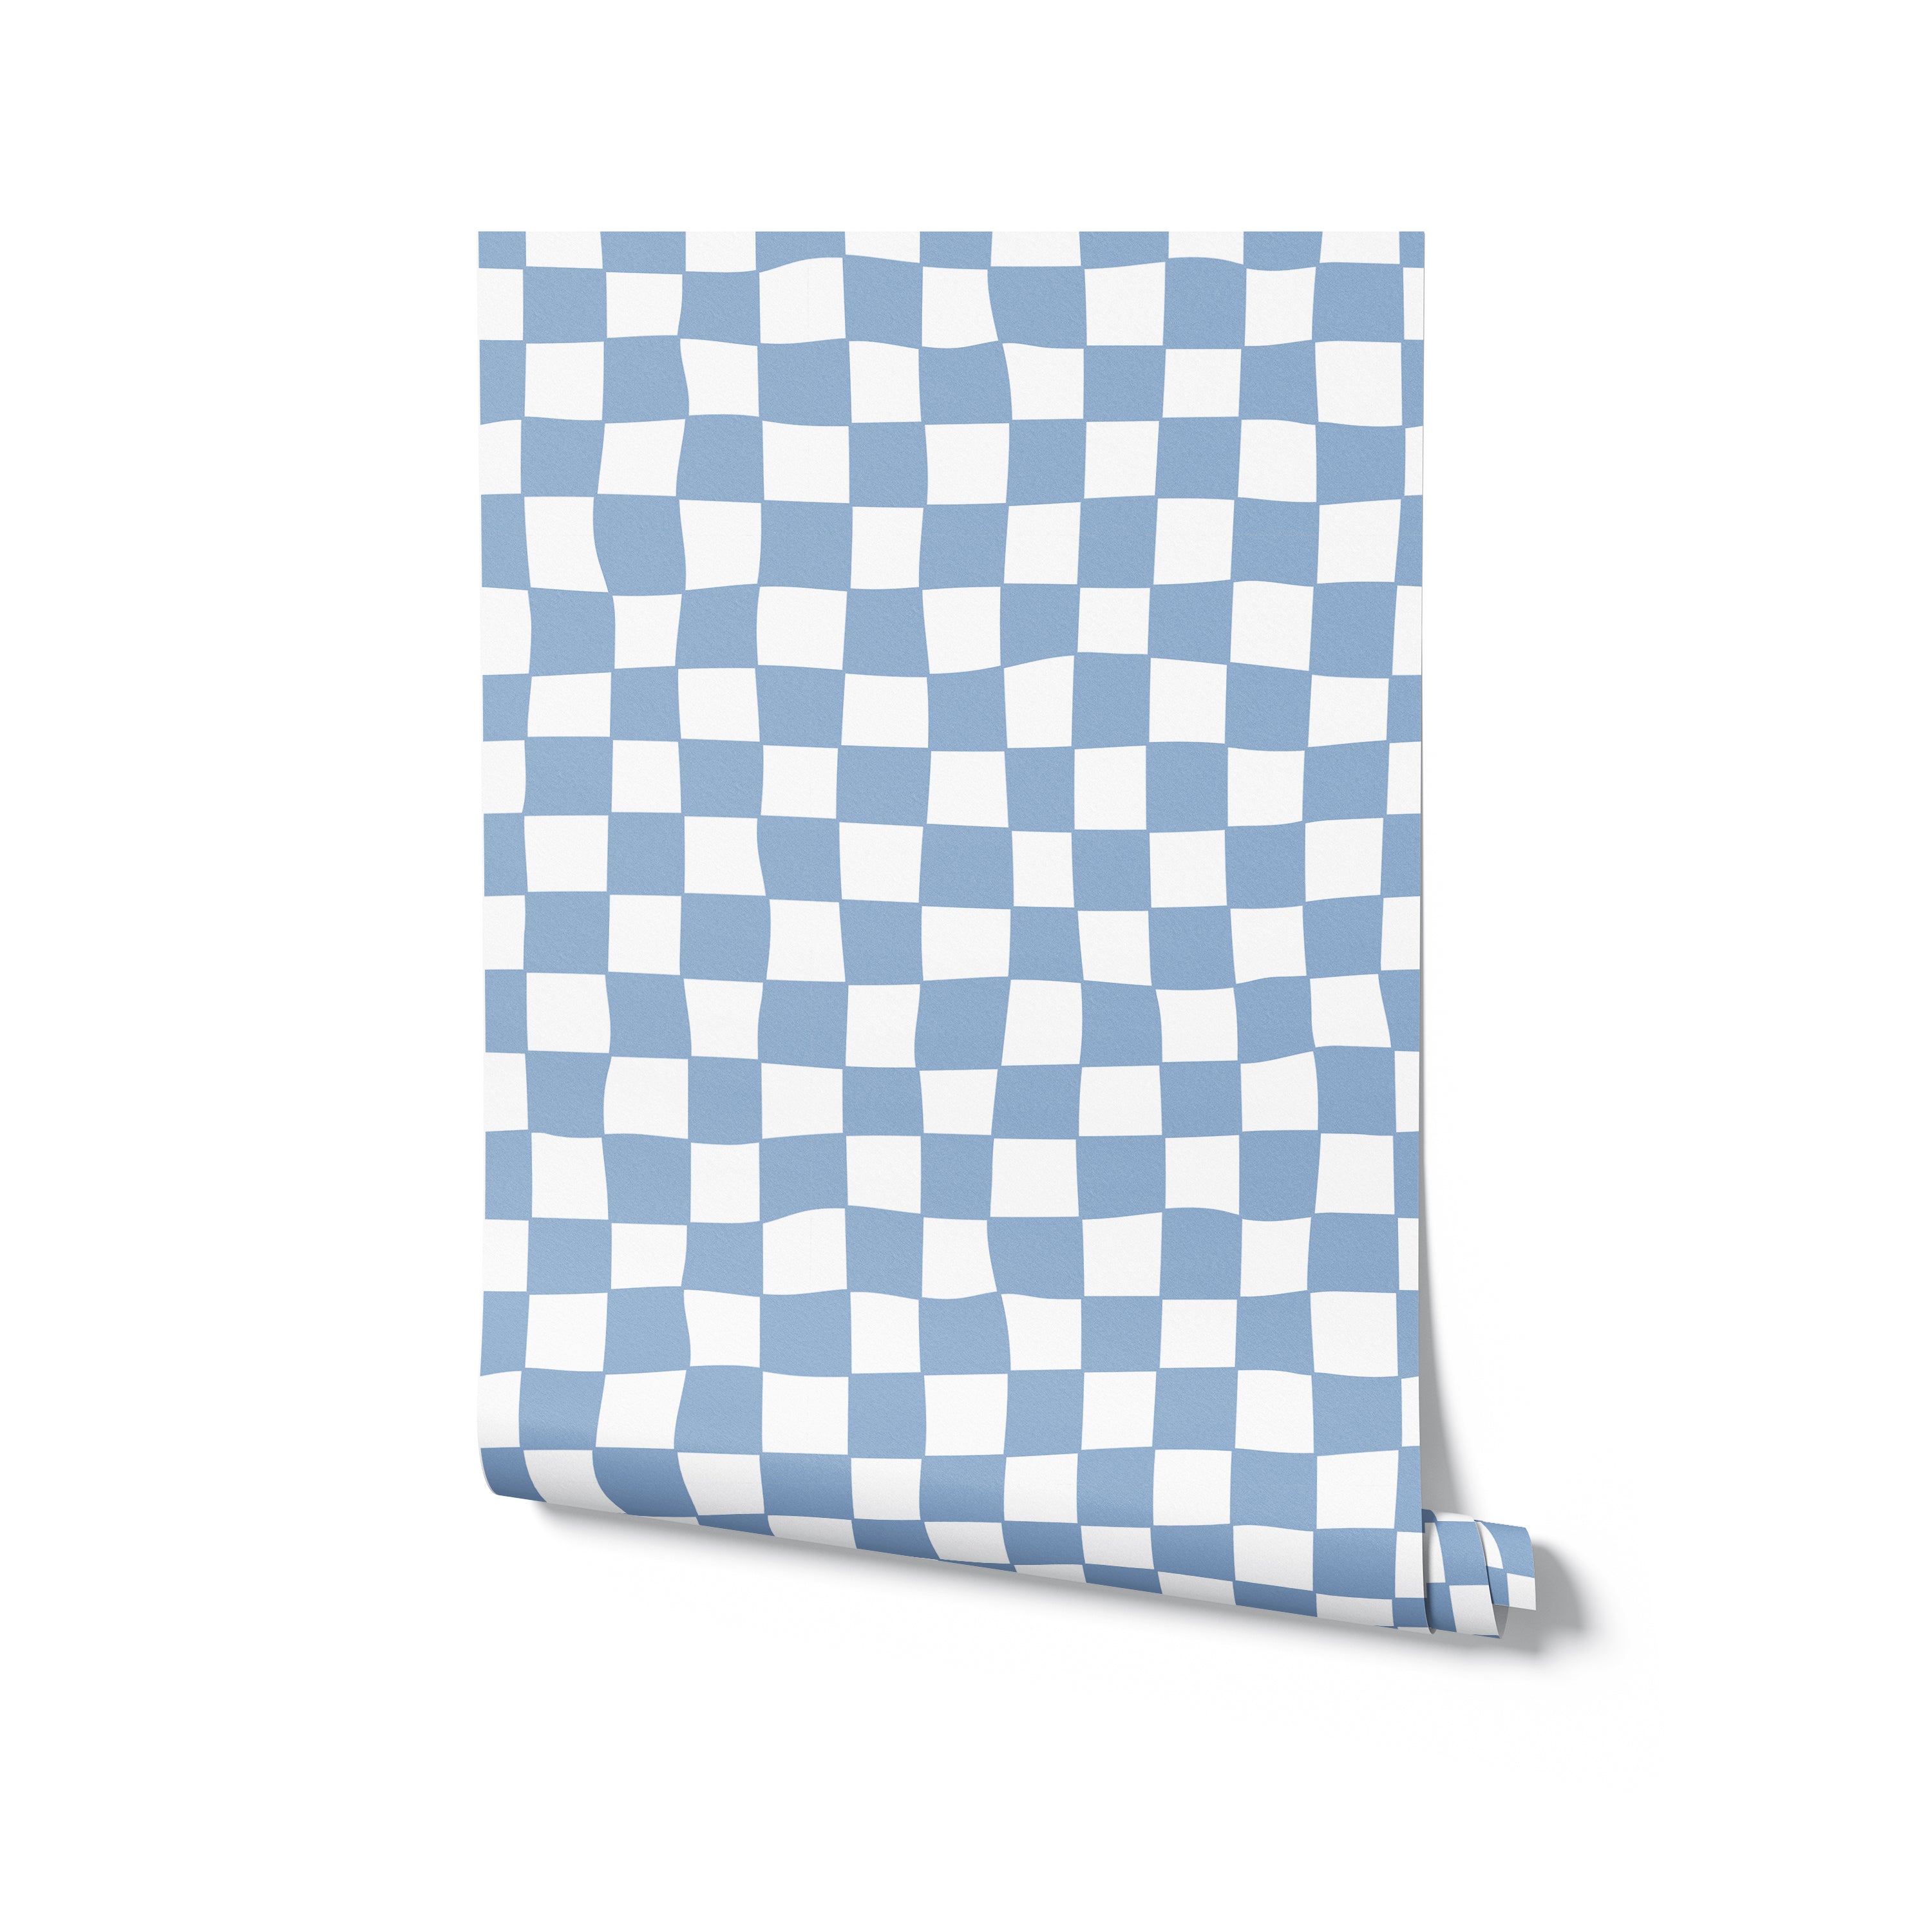 A roll of blue and white checkered wallpaper presented in a three-dimensional view. The wallpaper is rolled slightly at one corner, emphasizing its pattern and texture.